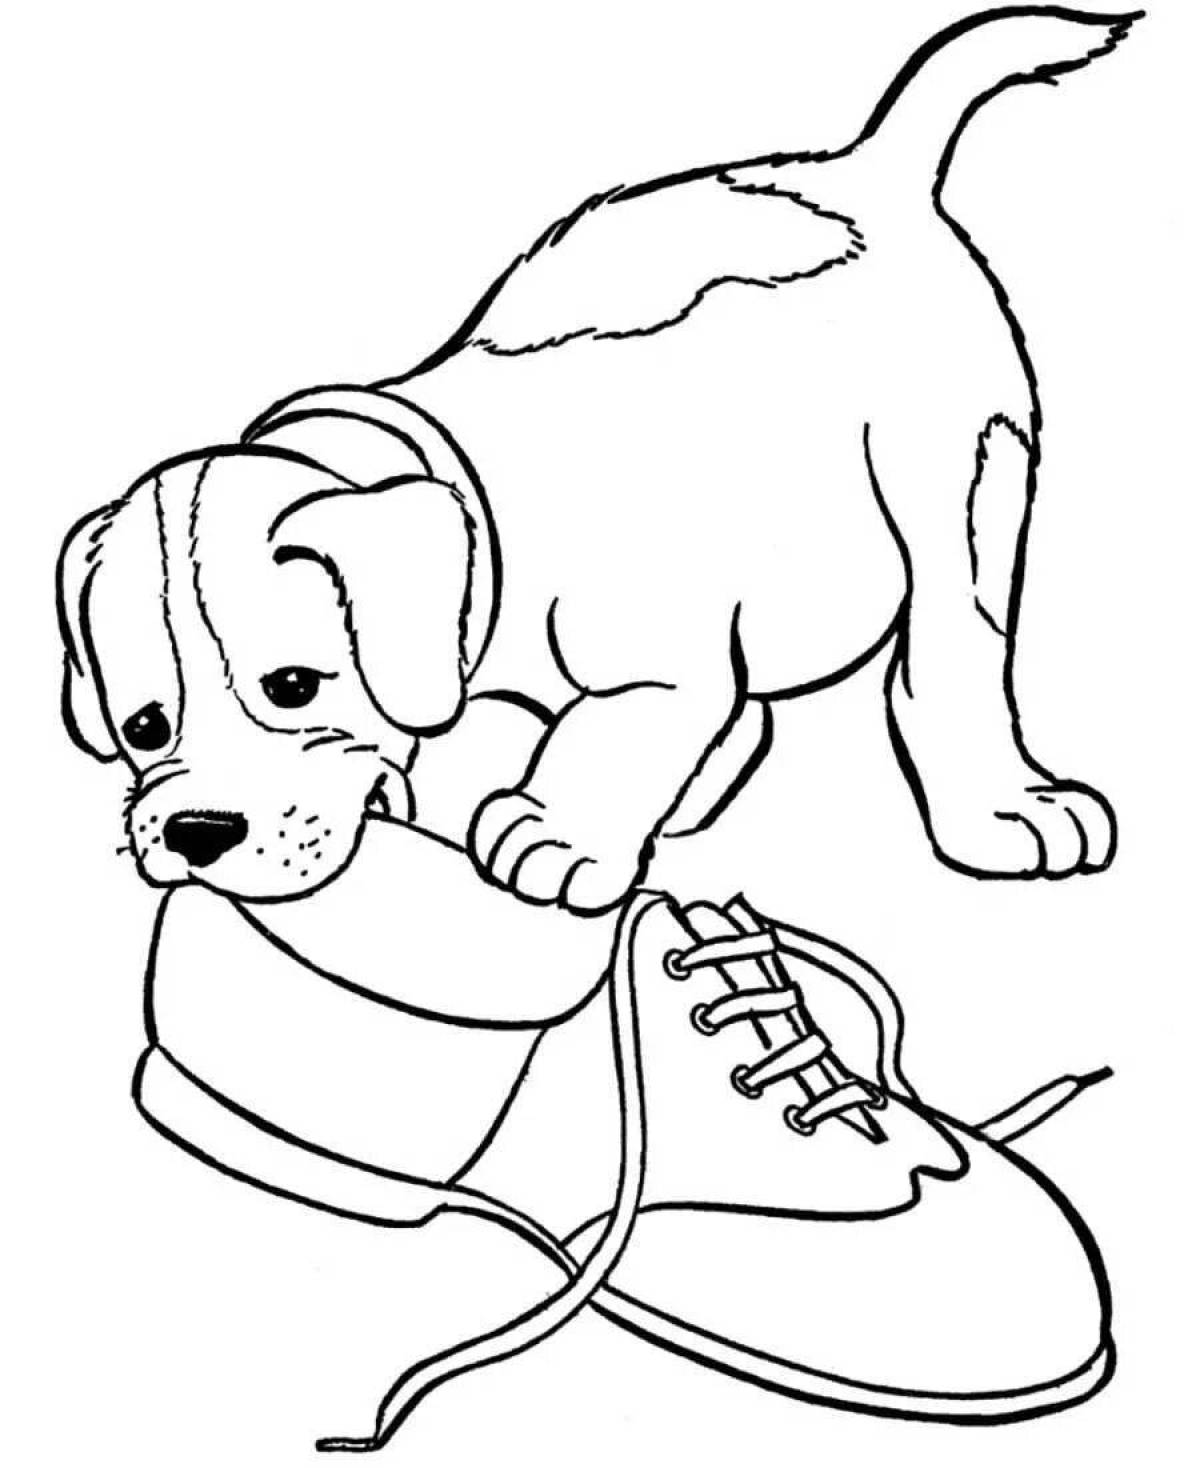 Energetic coloring book for dog boys